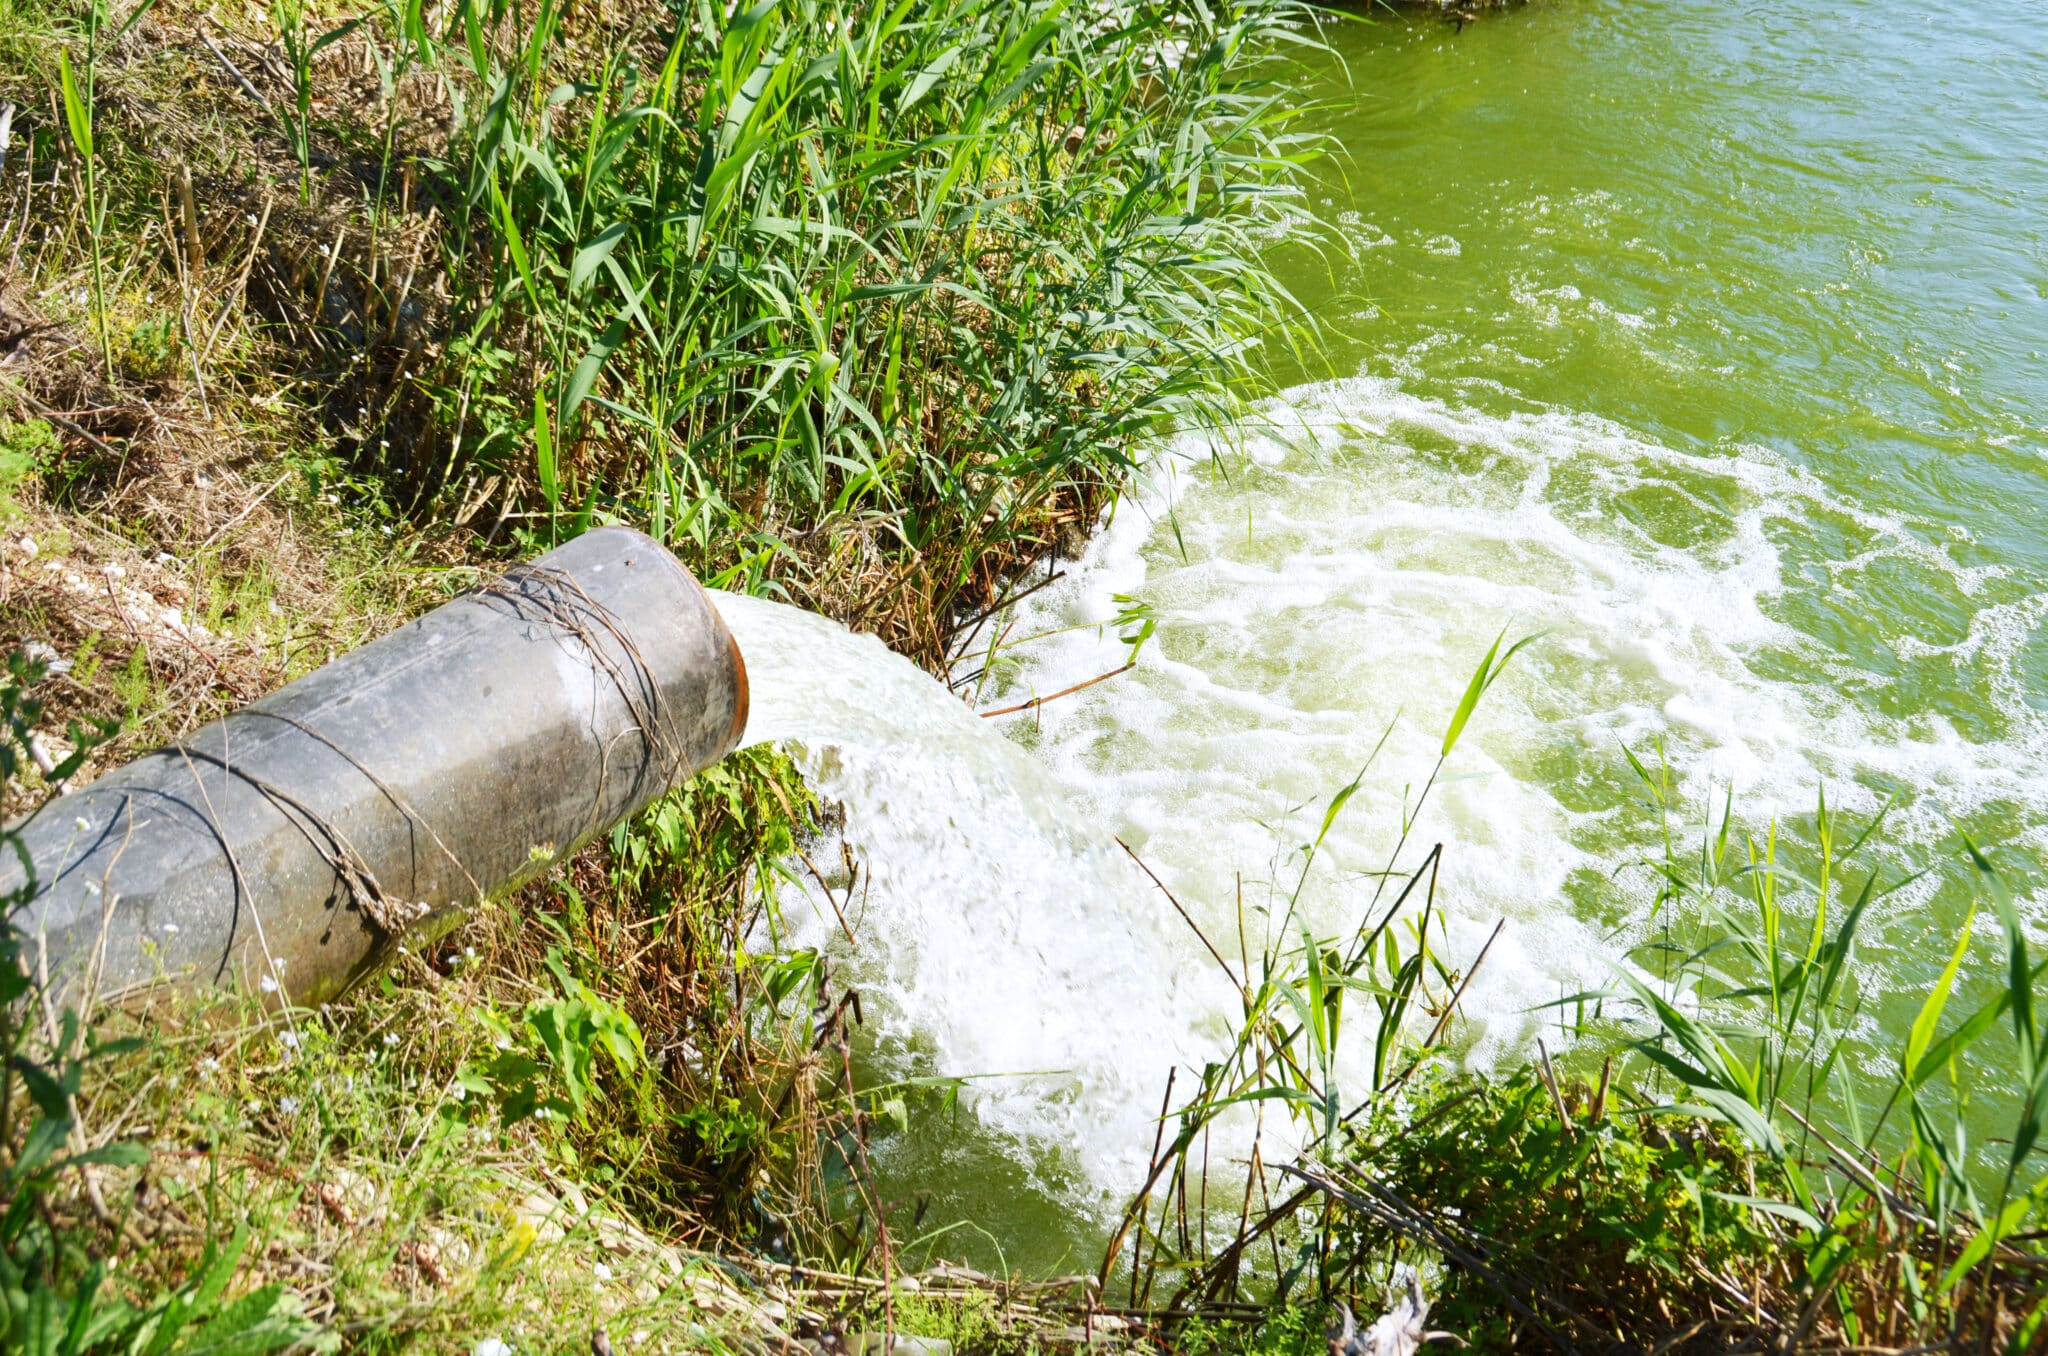 5 million pounds of toxic chemicals were dumped into Georgia's water in 2020